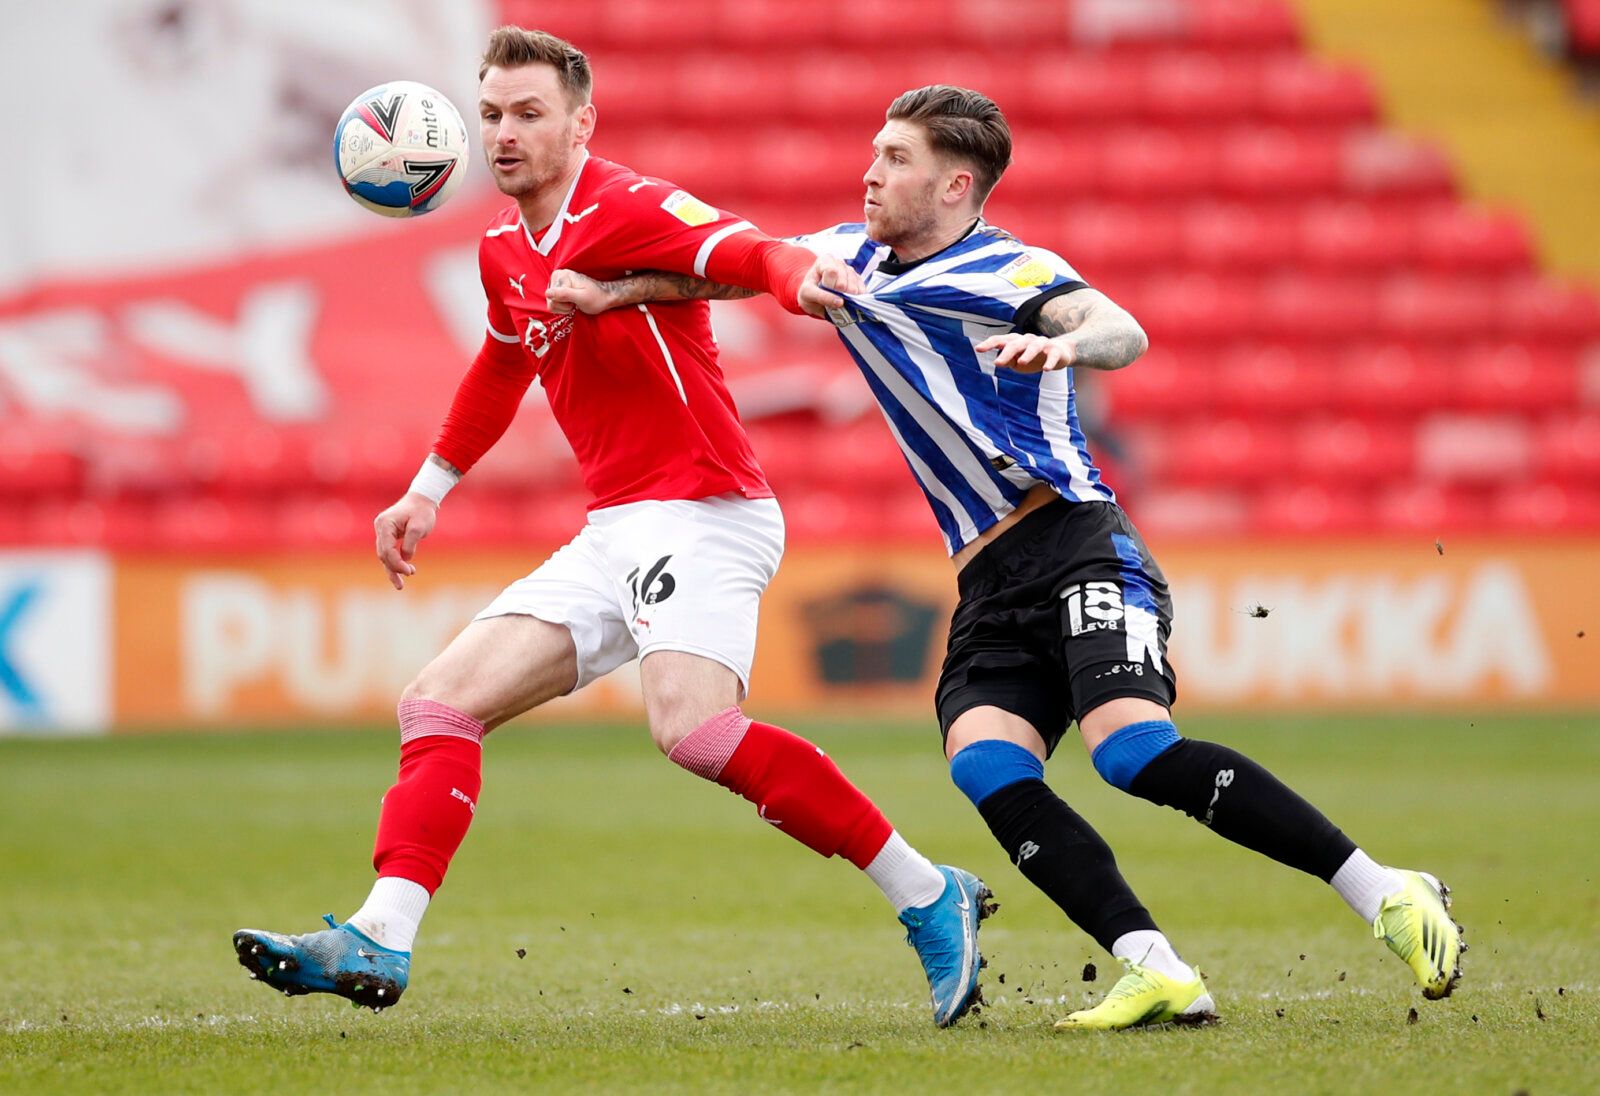 Soccer Football - Championship - Barnsley v Sheffield Wednesday - Oakwell, Barnsley, Britain - March 20, 2021 Barnsley's Michael Sollbauer in action with Sheffield Wednesday's Josh Windass Action Images/Andrew Boyers EDITORIAL USE ONLY. No use with unauthorized audio, video, data, fixture lists, club/league logos or 'live' services. Online in-match use limited to 75 images, no video emulation. No use in betting, games or single club /league/player publications.  Please contact your account repre